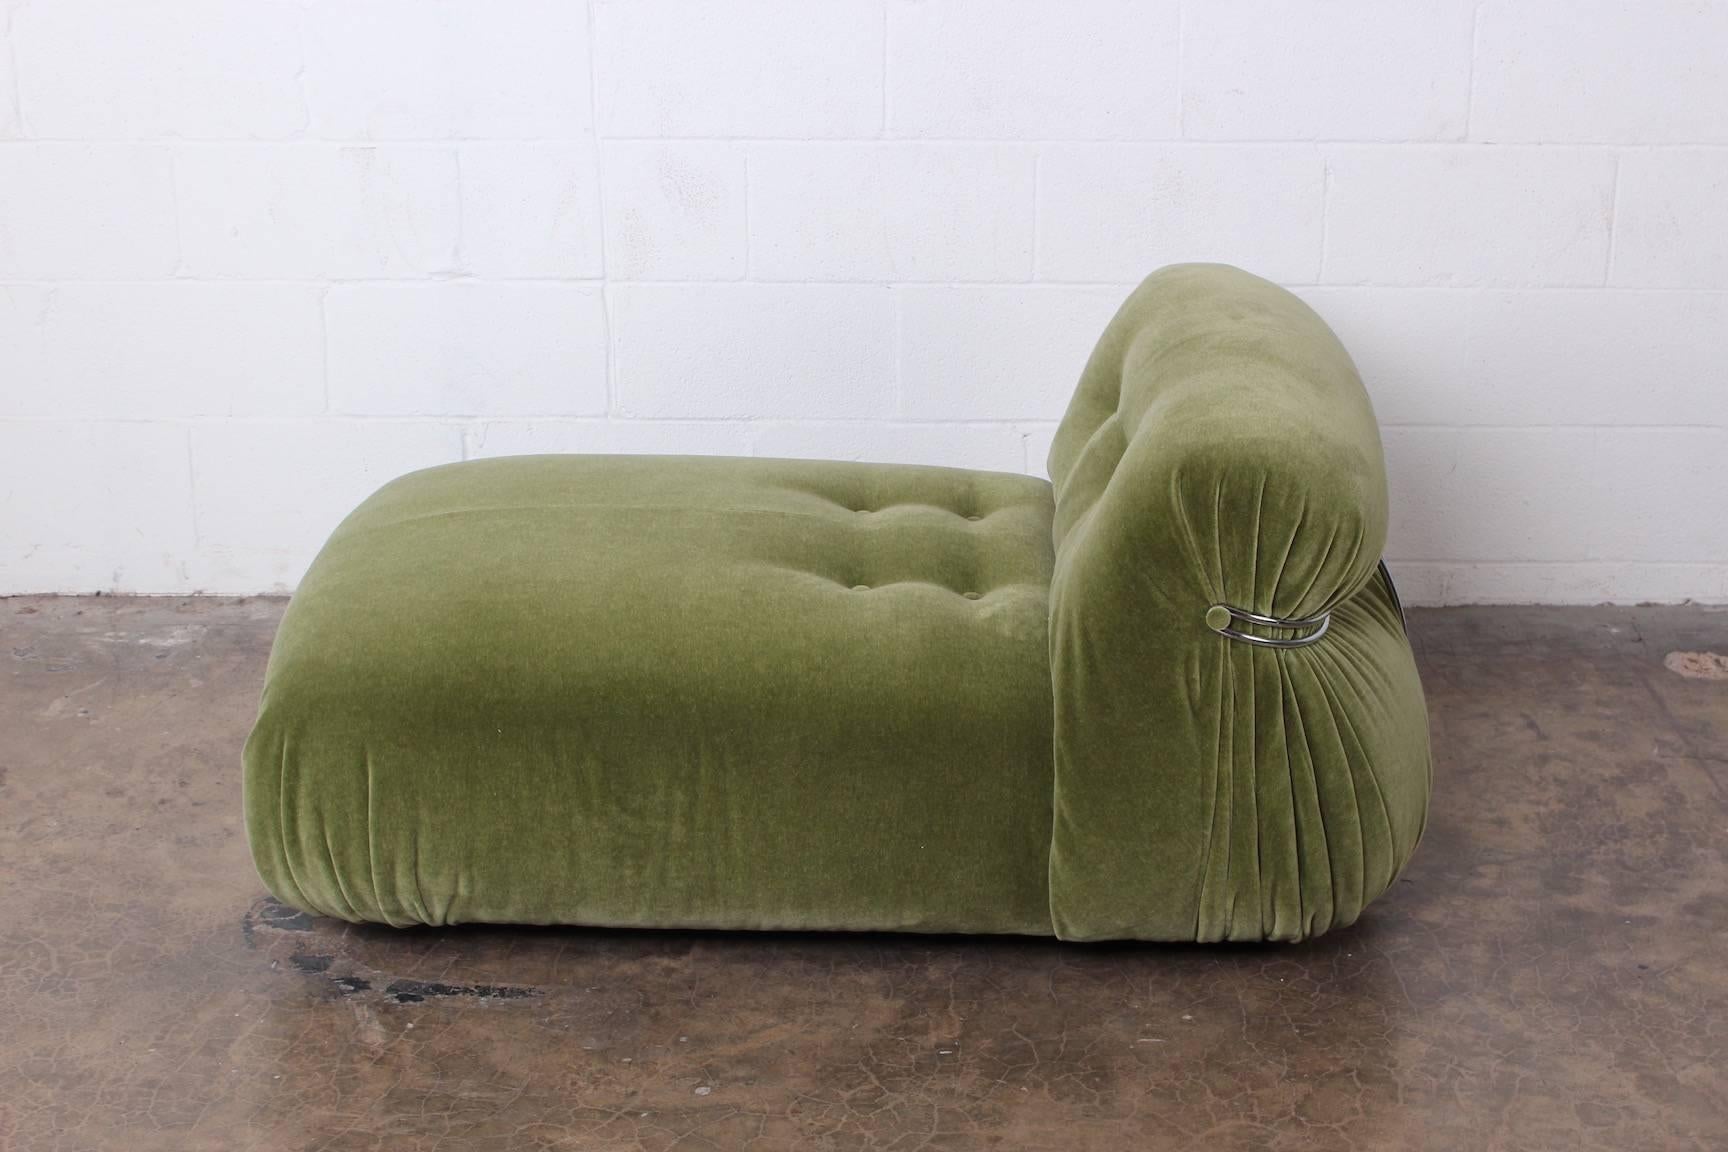 A Soriana chaise longue in green mohair. Designed by Tobia and Afra Scarpa for Cassina.